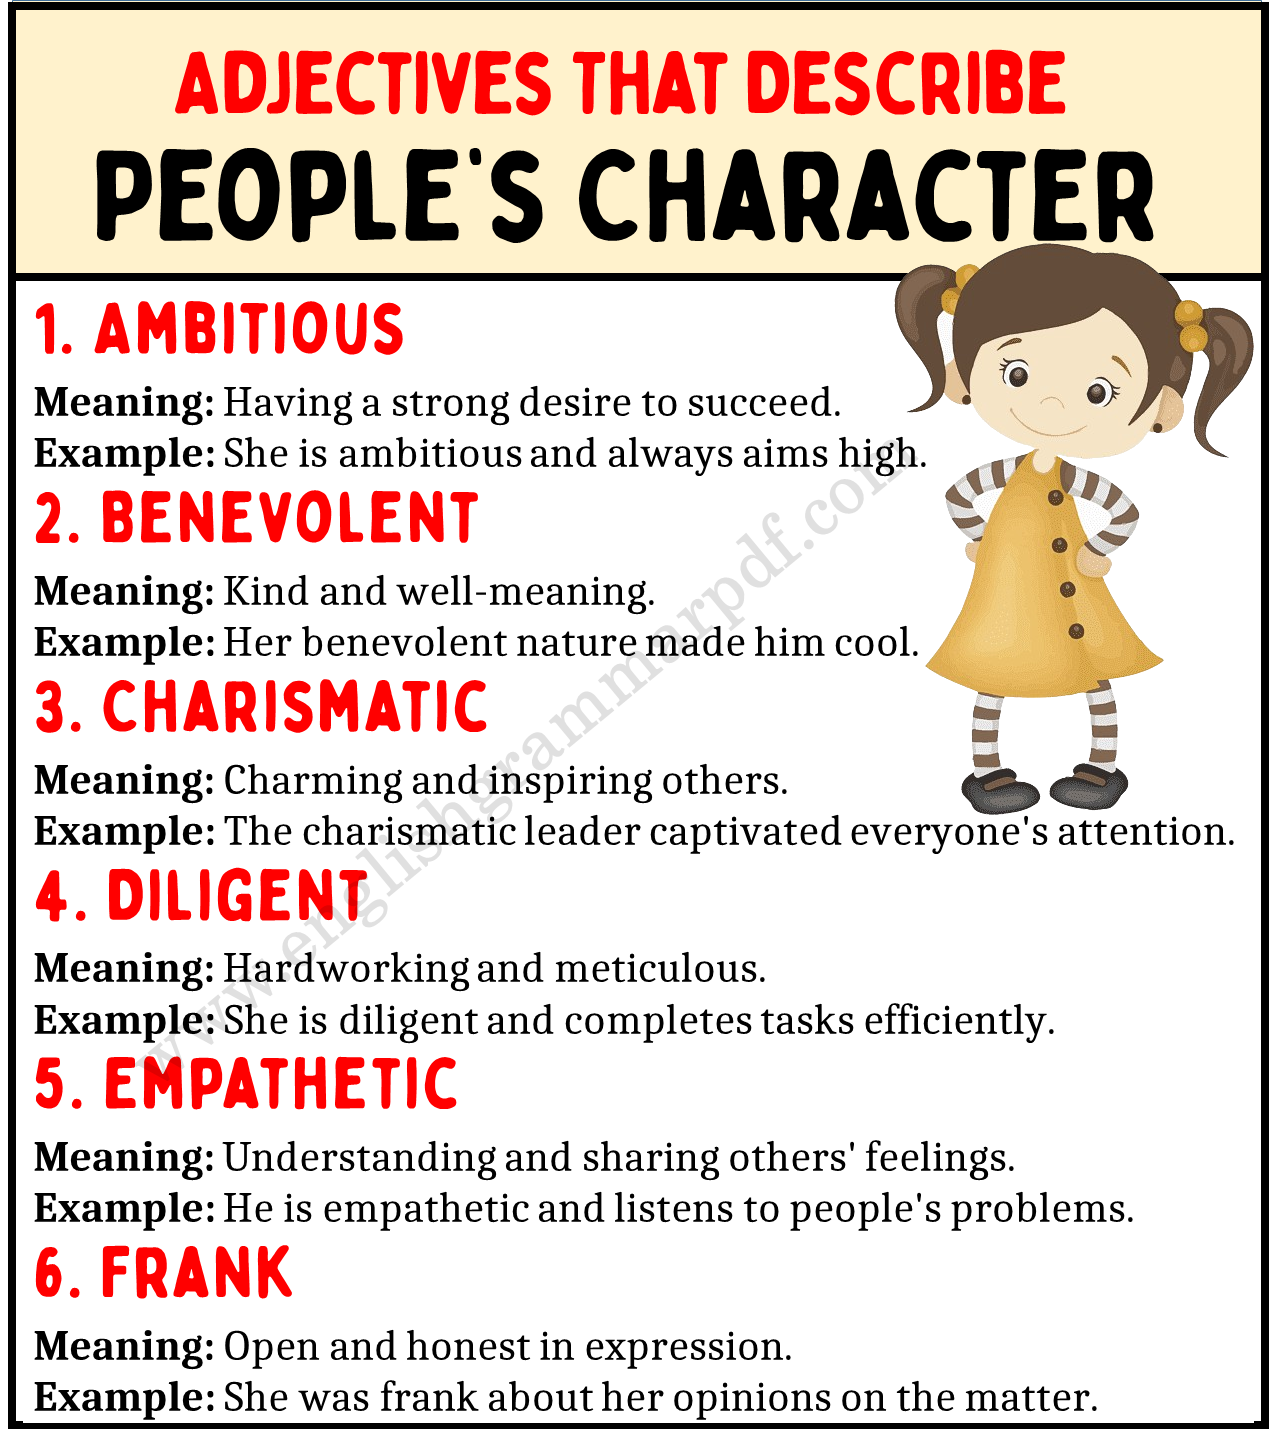 Adjectives to Describe People’s Character